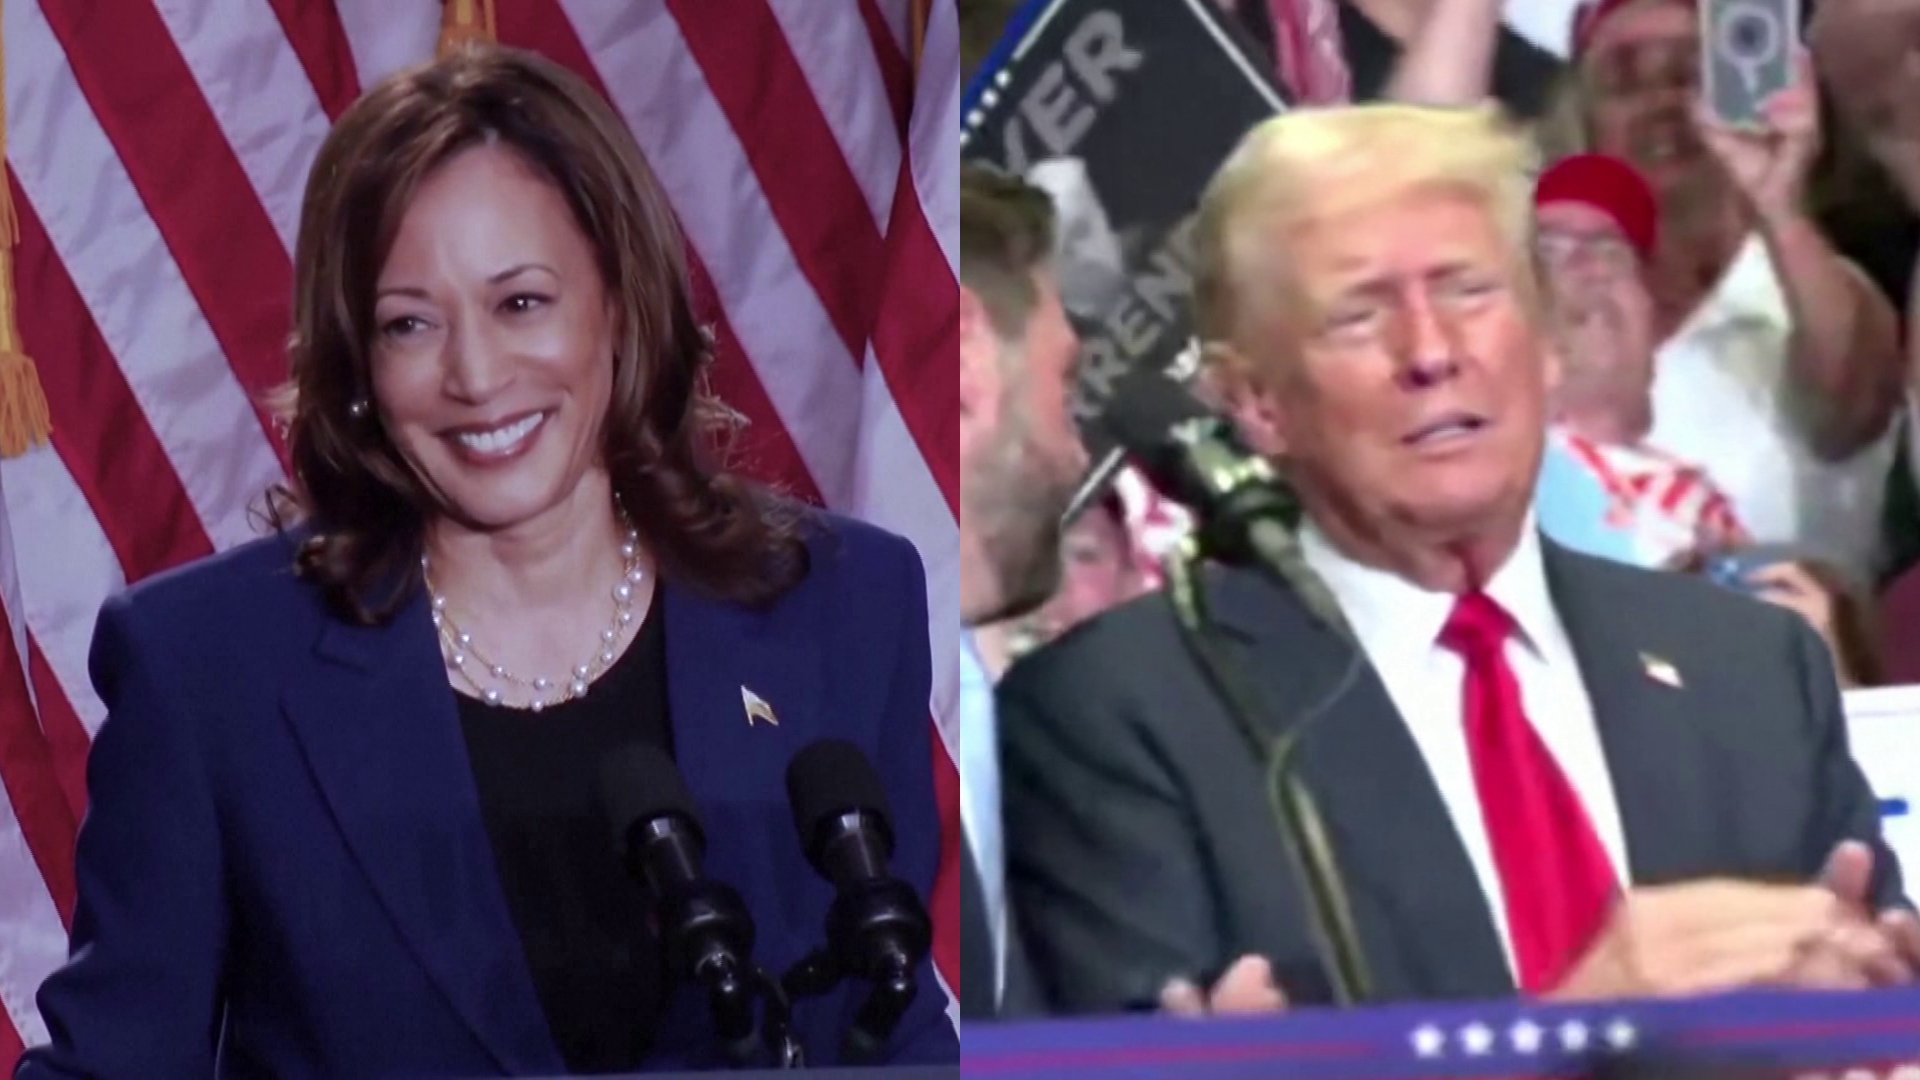 Trump and Harris step up attacks as campaigns intensify